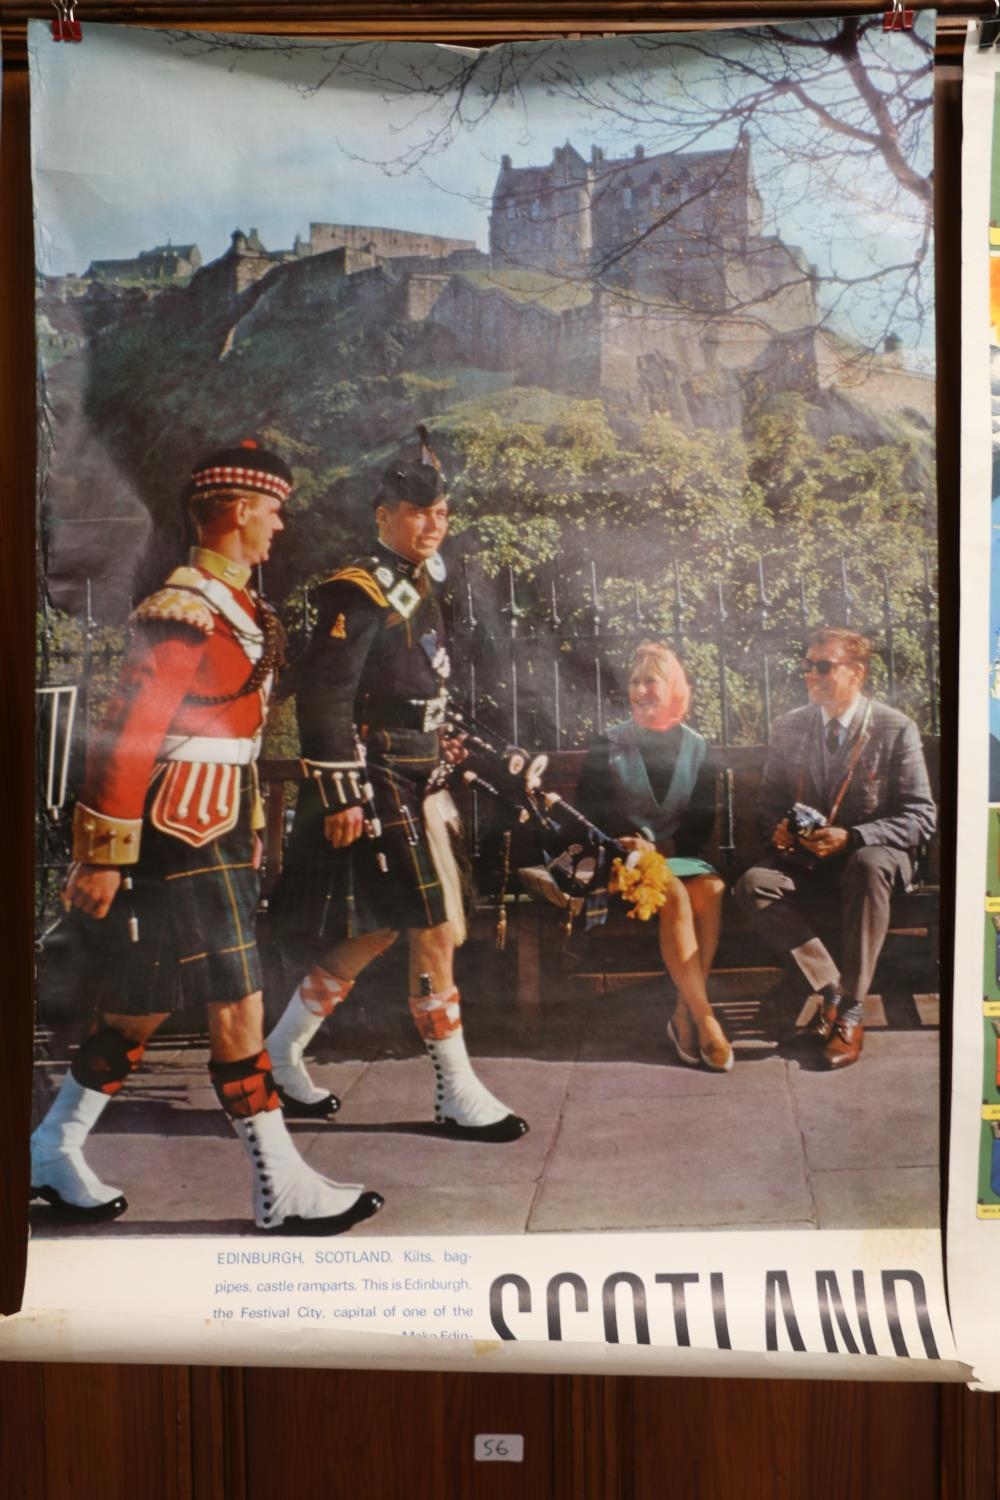 Vintage travel poster 'Scotland, Kilts, Bagpipes, Castle Ramparts', published by The British